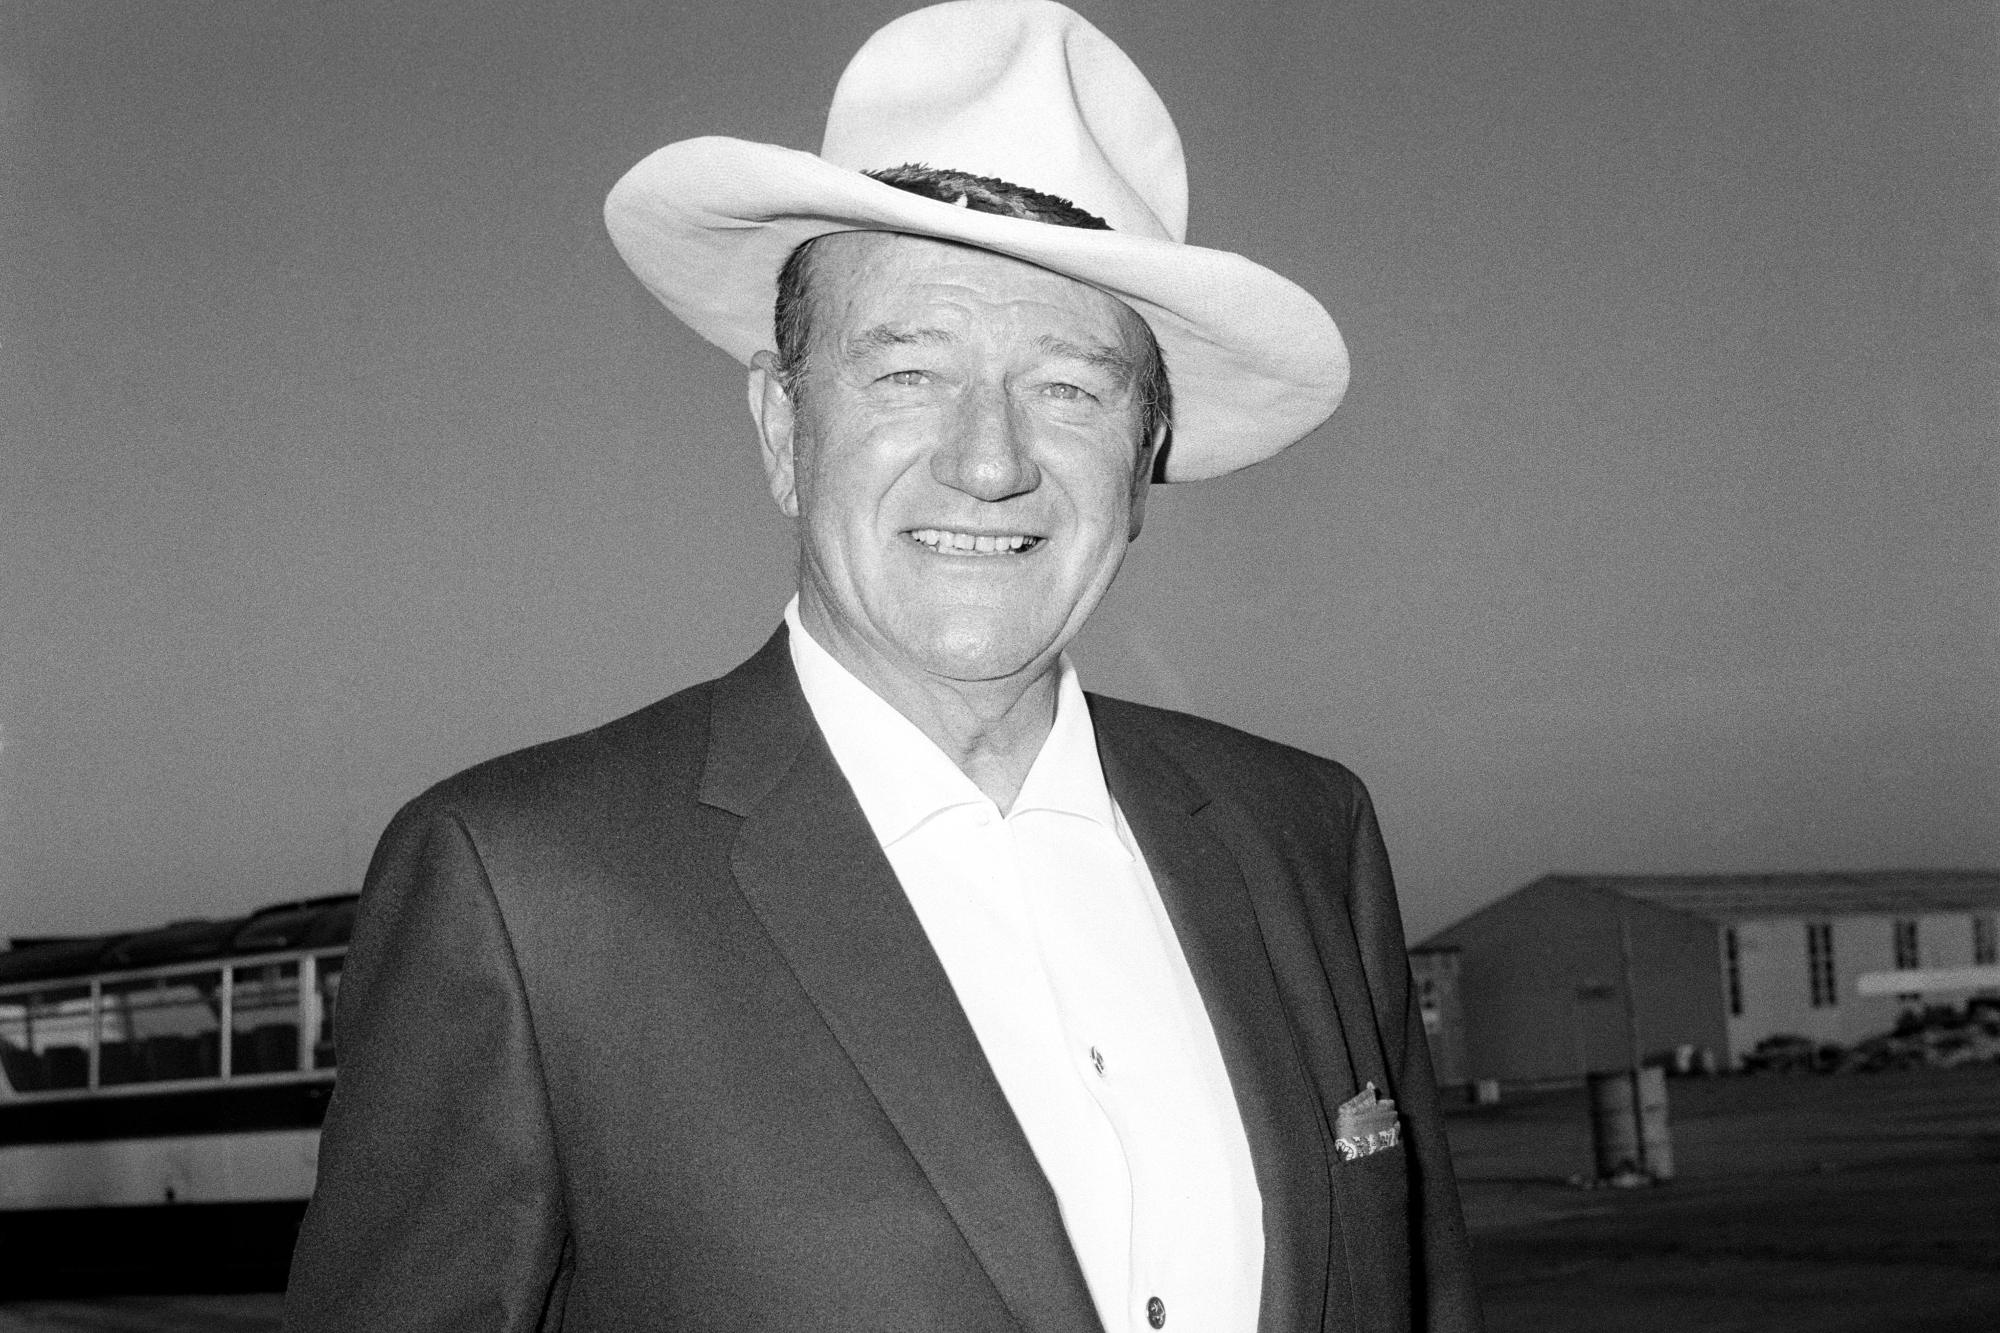 John Wayne, who starred in Western movies. He's smiling wearing a suit jacket and white dress shirt. He has a hat on his head.